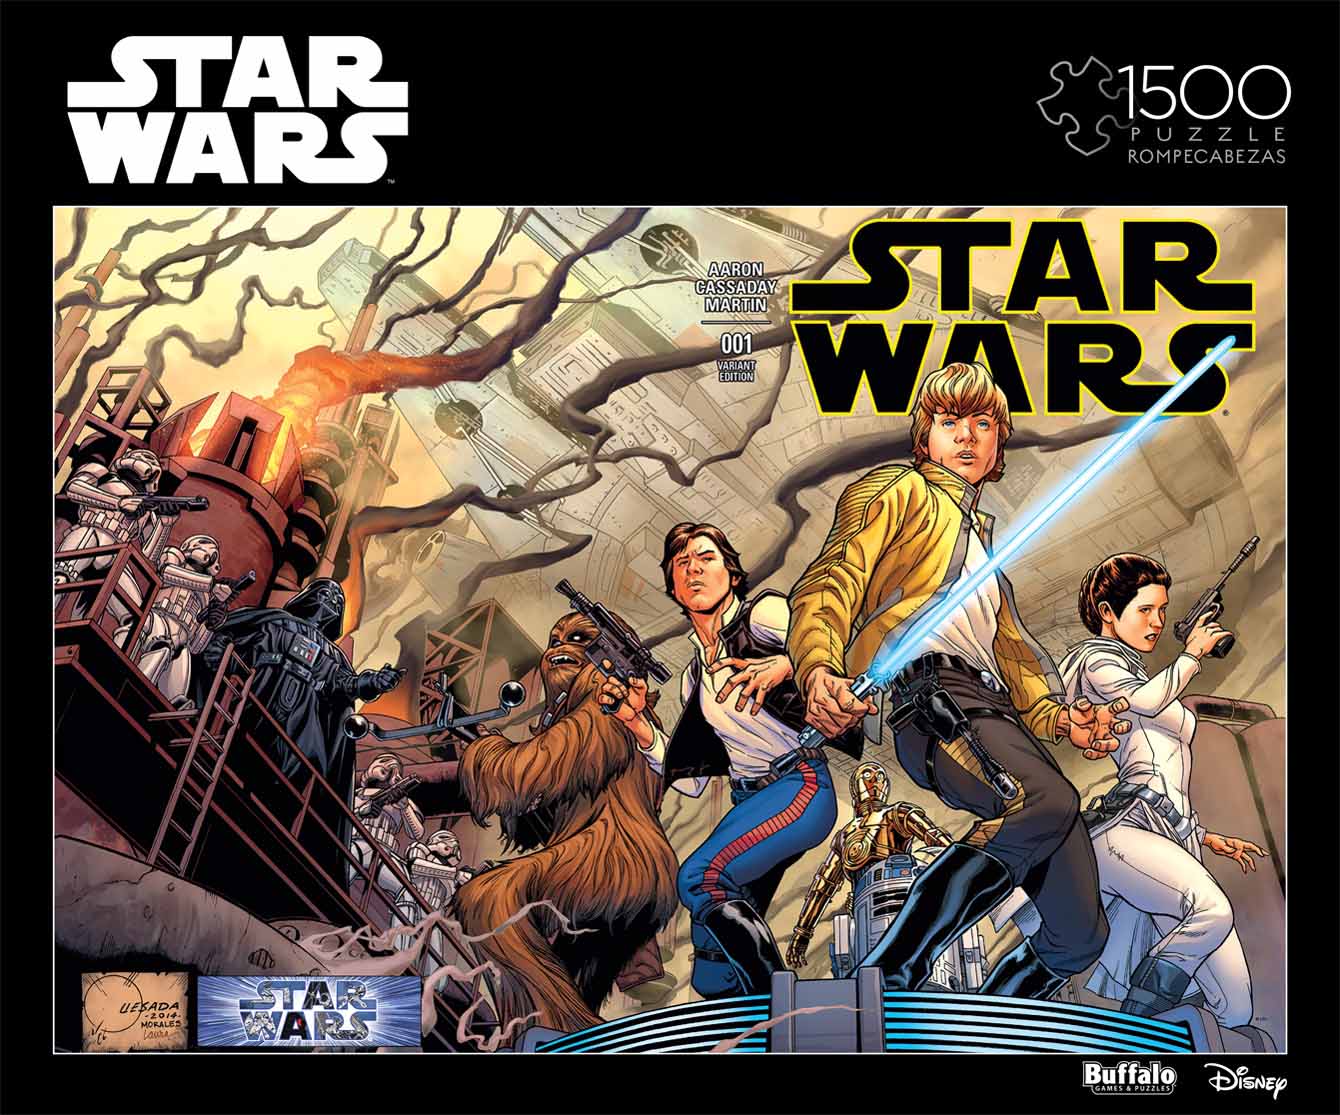 Star Wars #1 Variant Cover